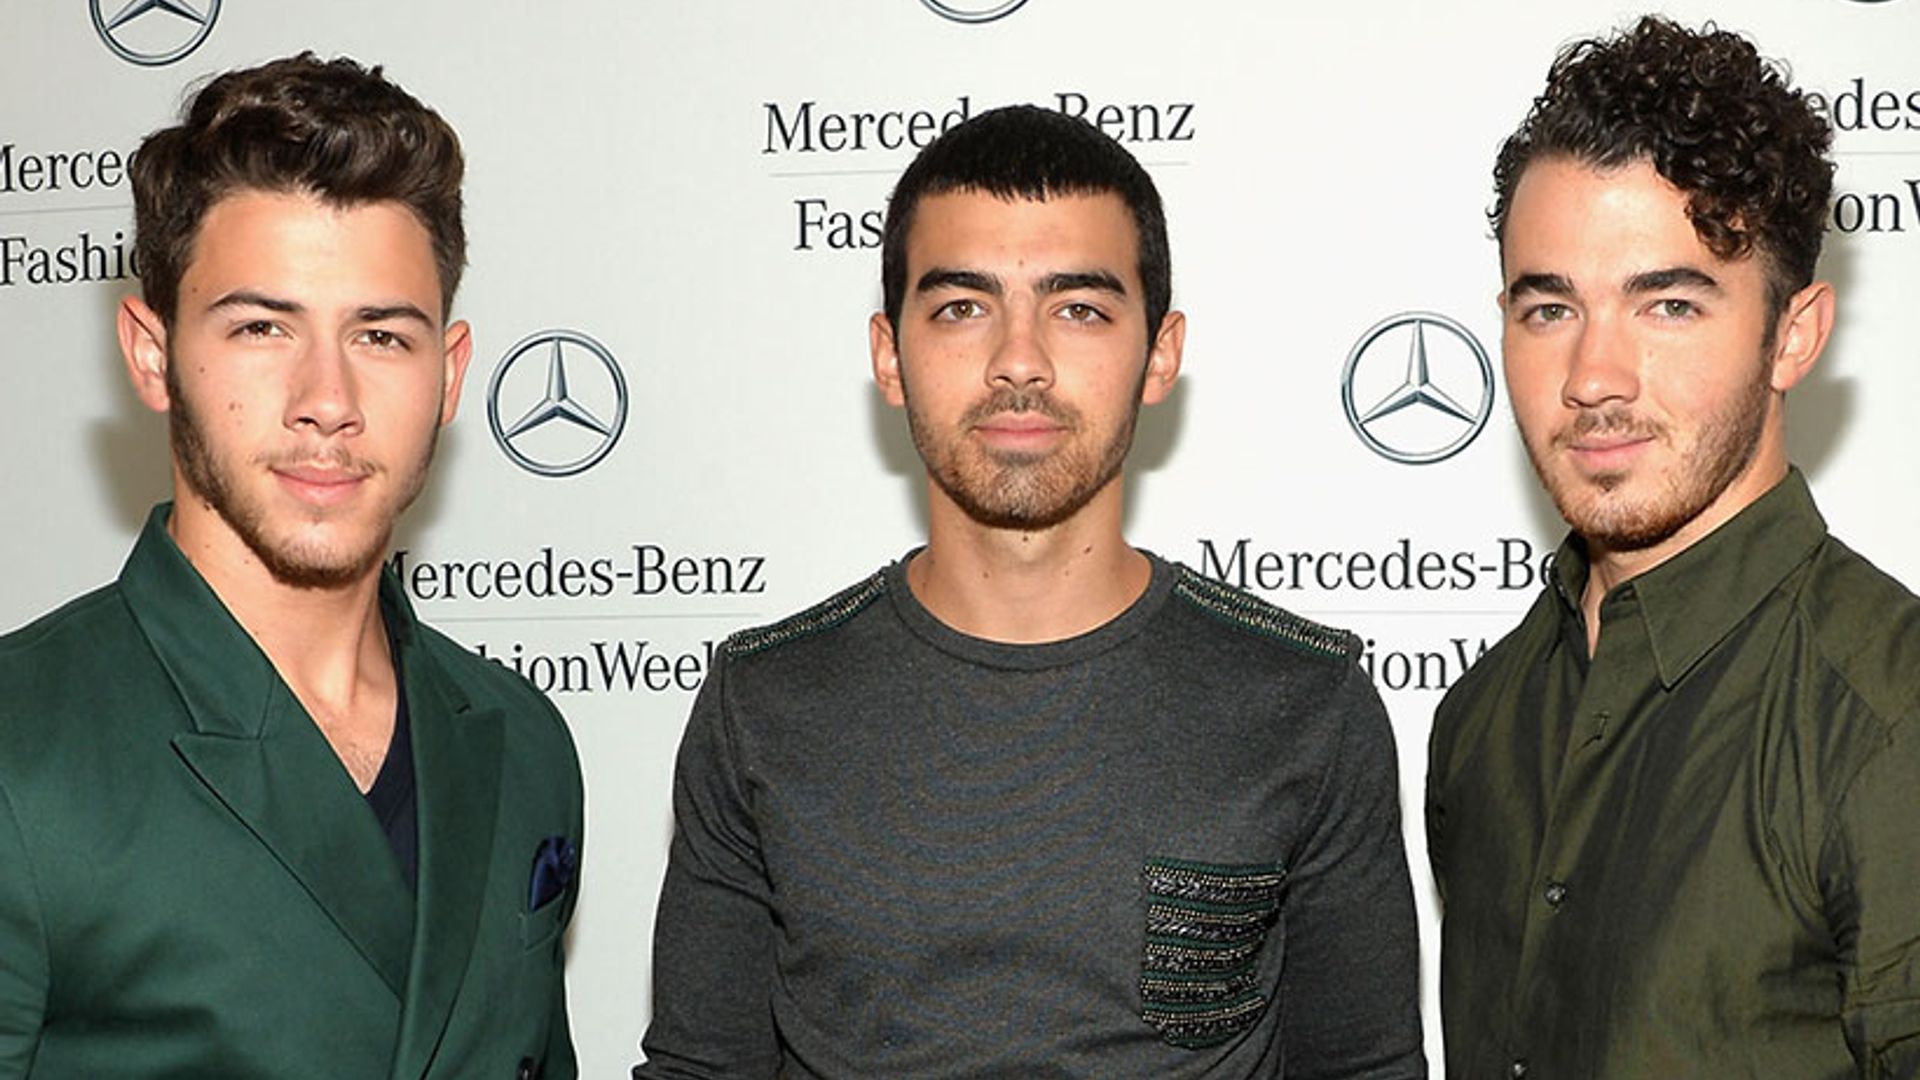 Watch the Jonas Brothers grow up in the spotlight